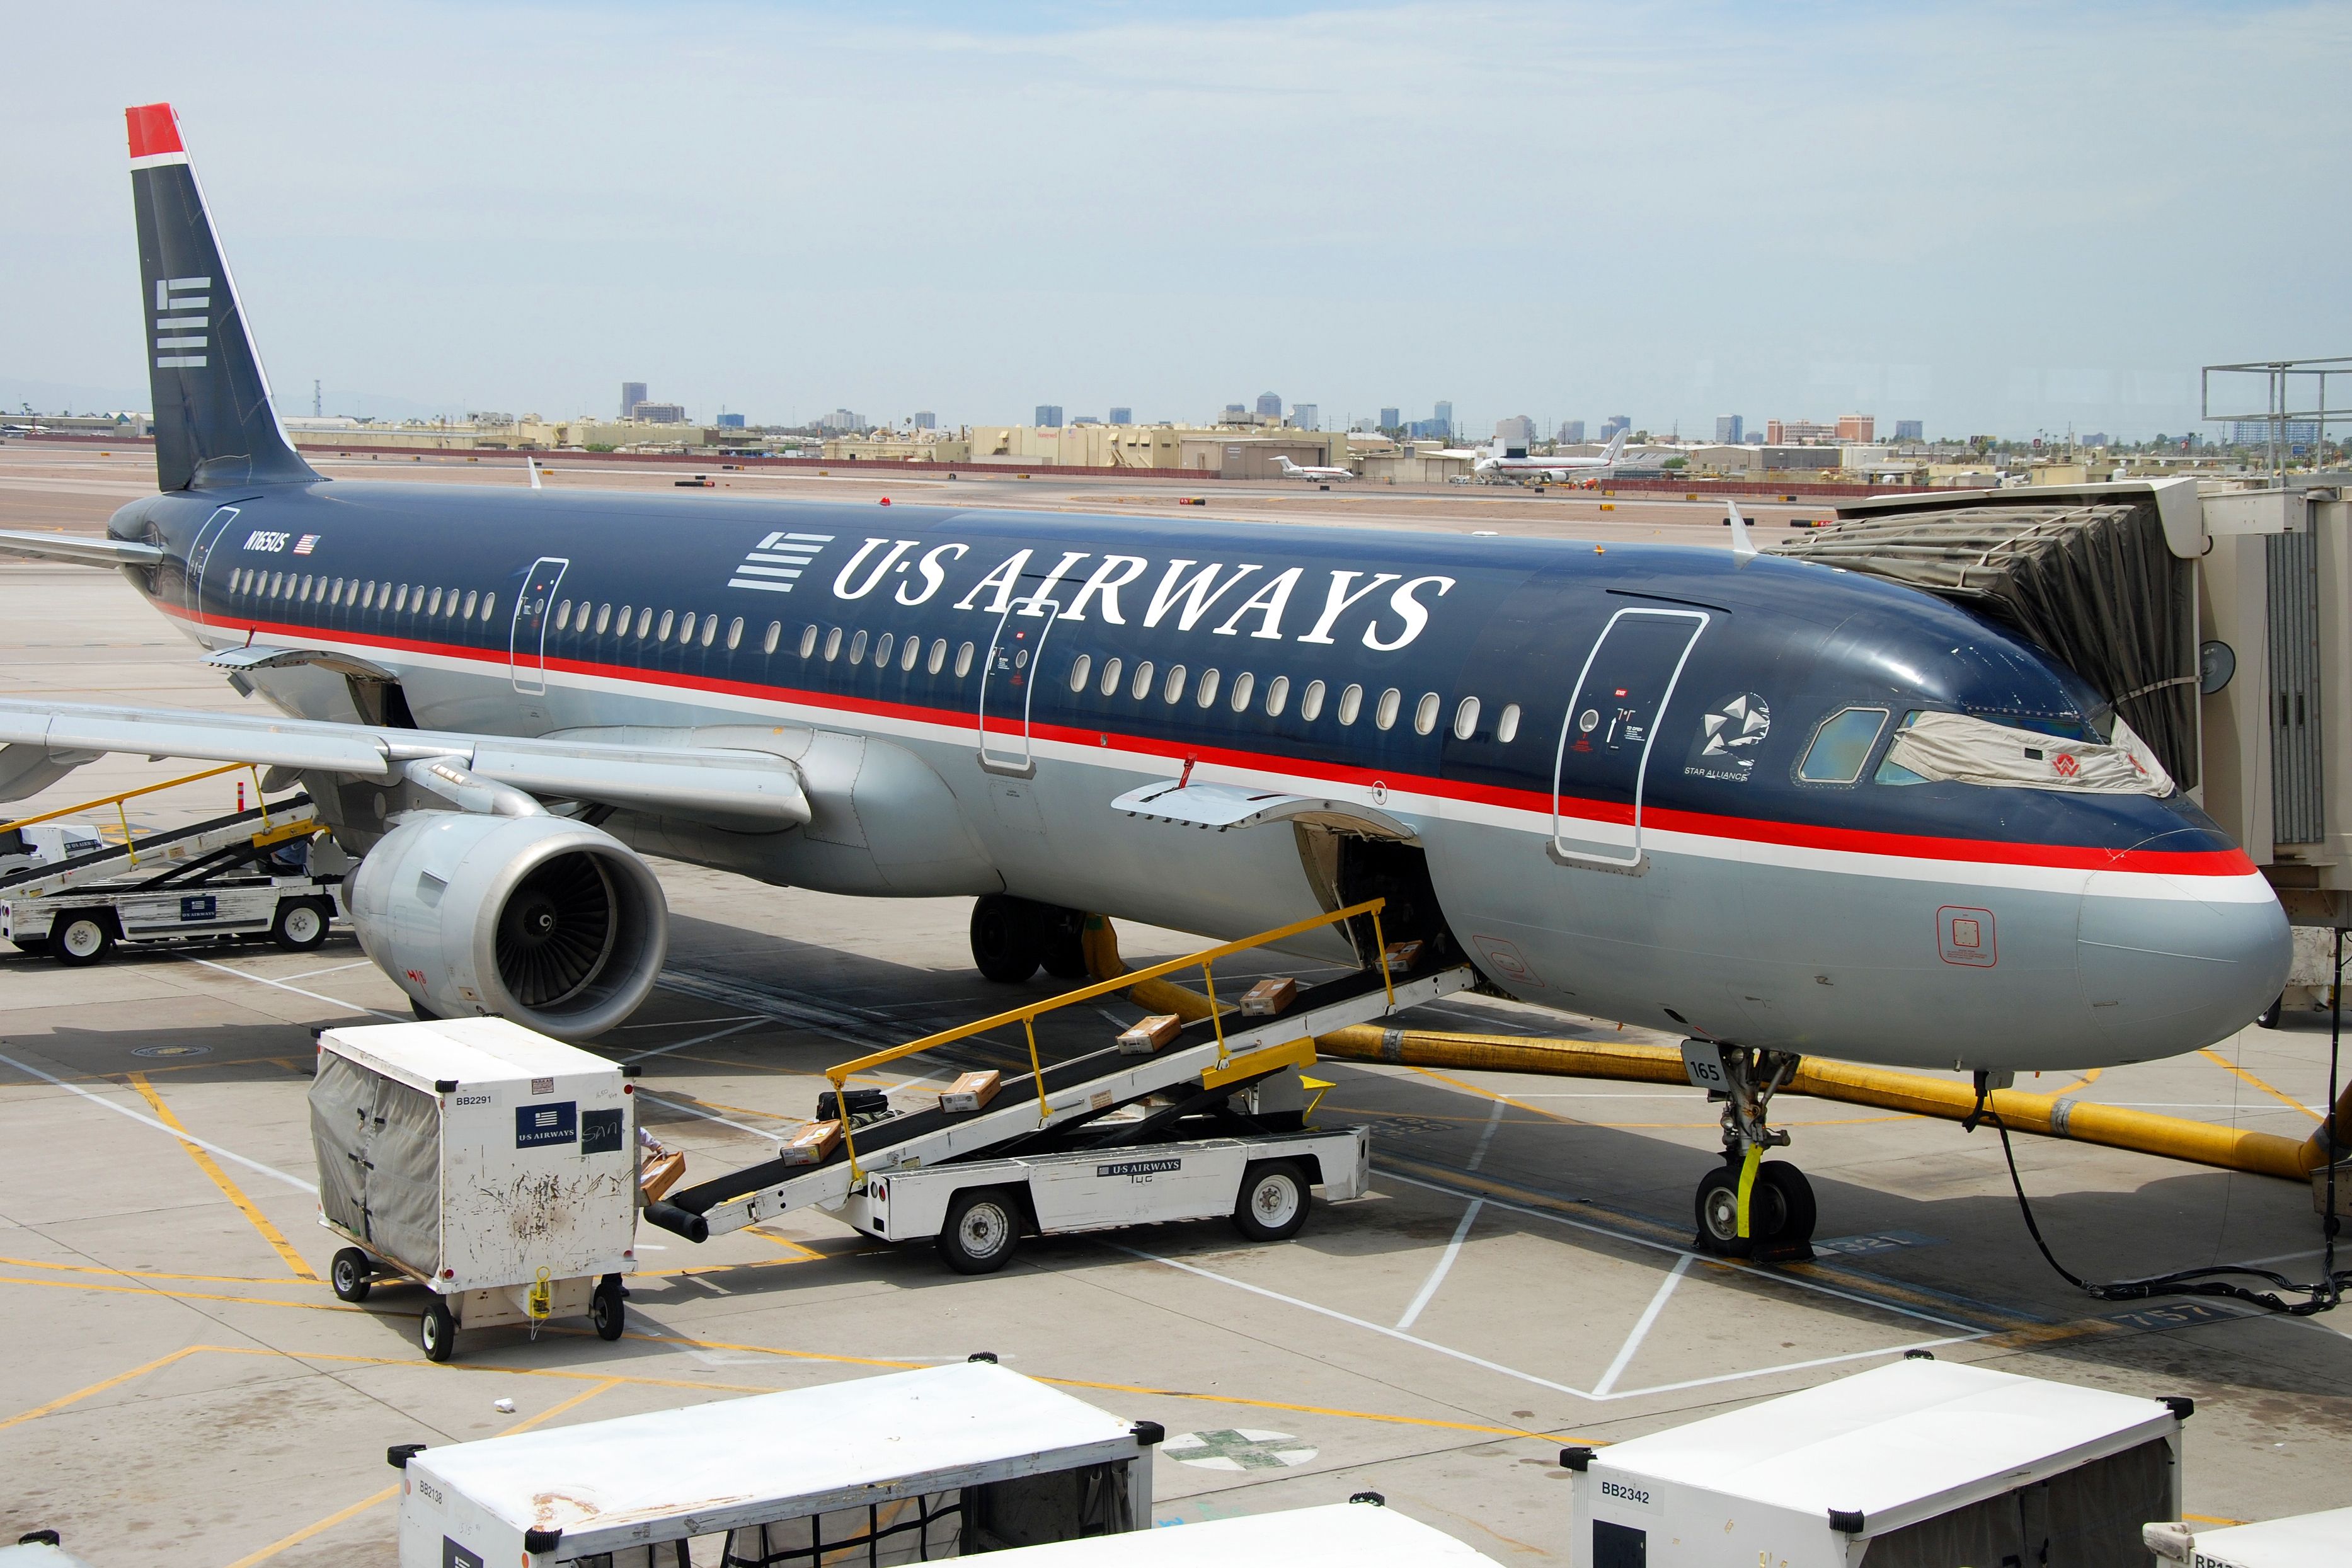 US Airways aircraft on the ground